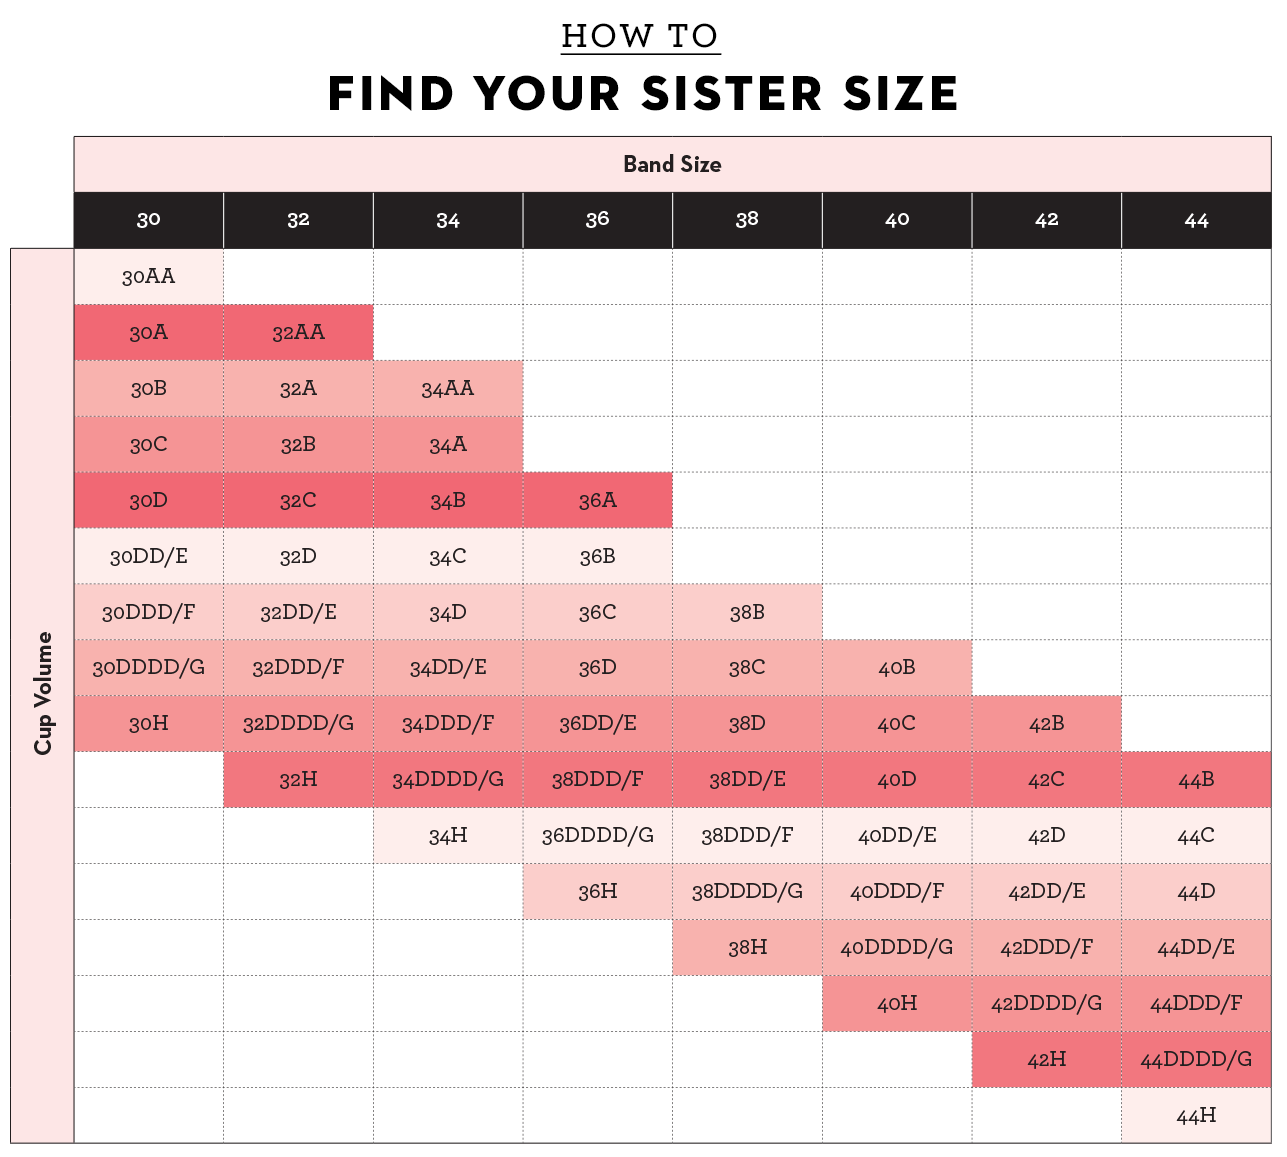 American (US) Bra Sizes in Inches and Centimeters